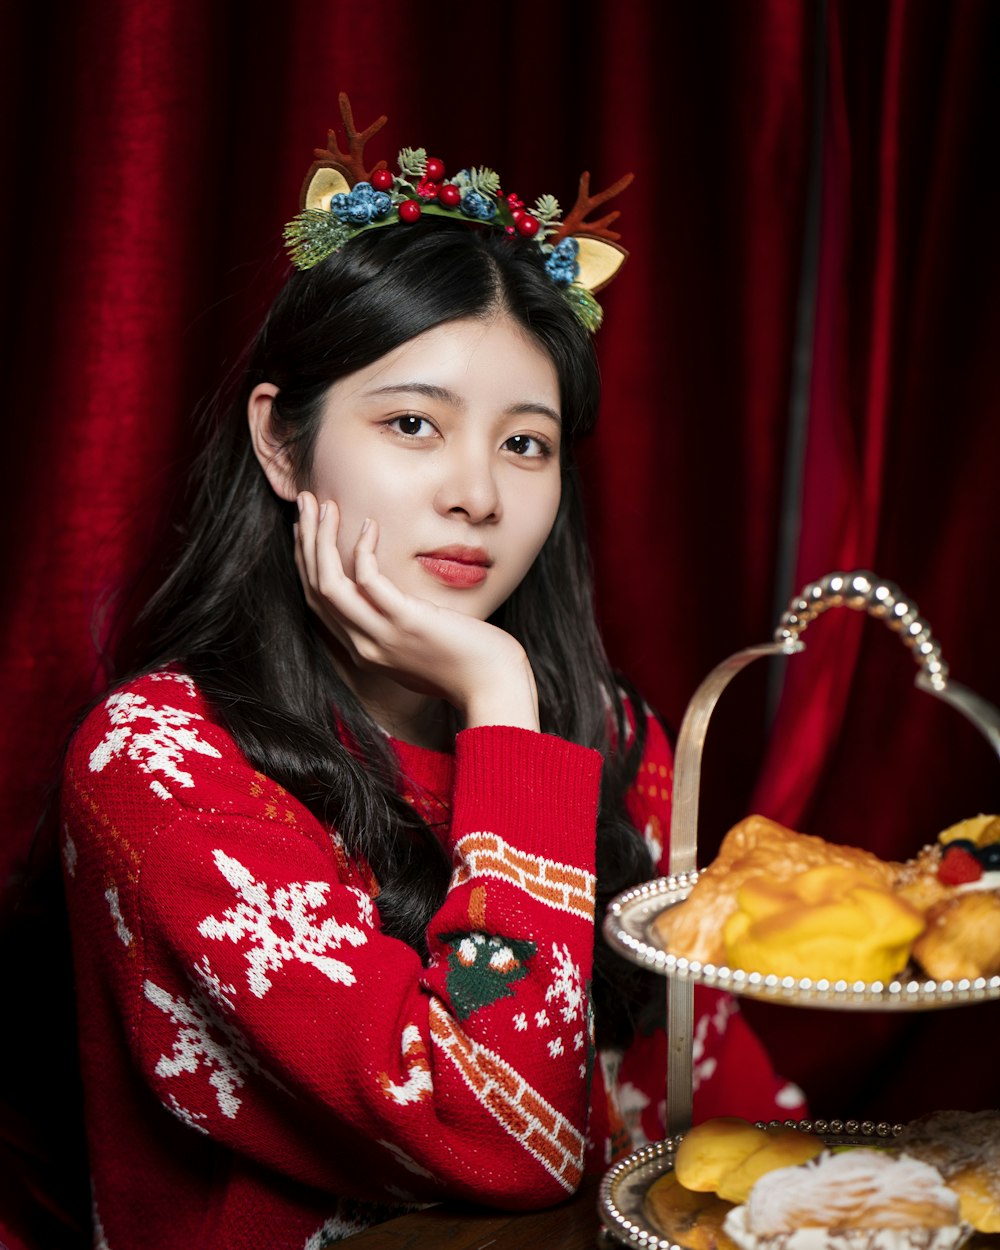 a woman in a red sweater is holding a tray of food